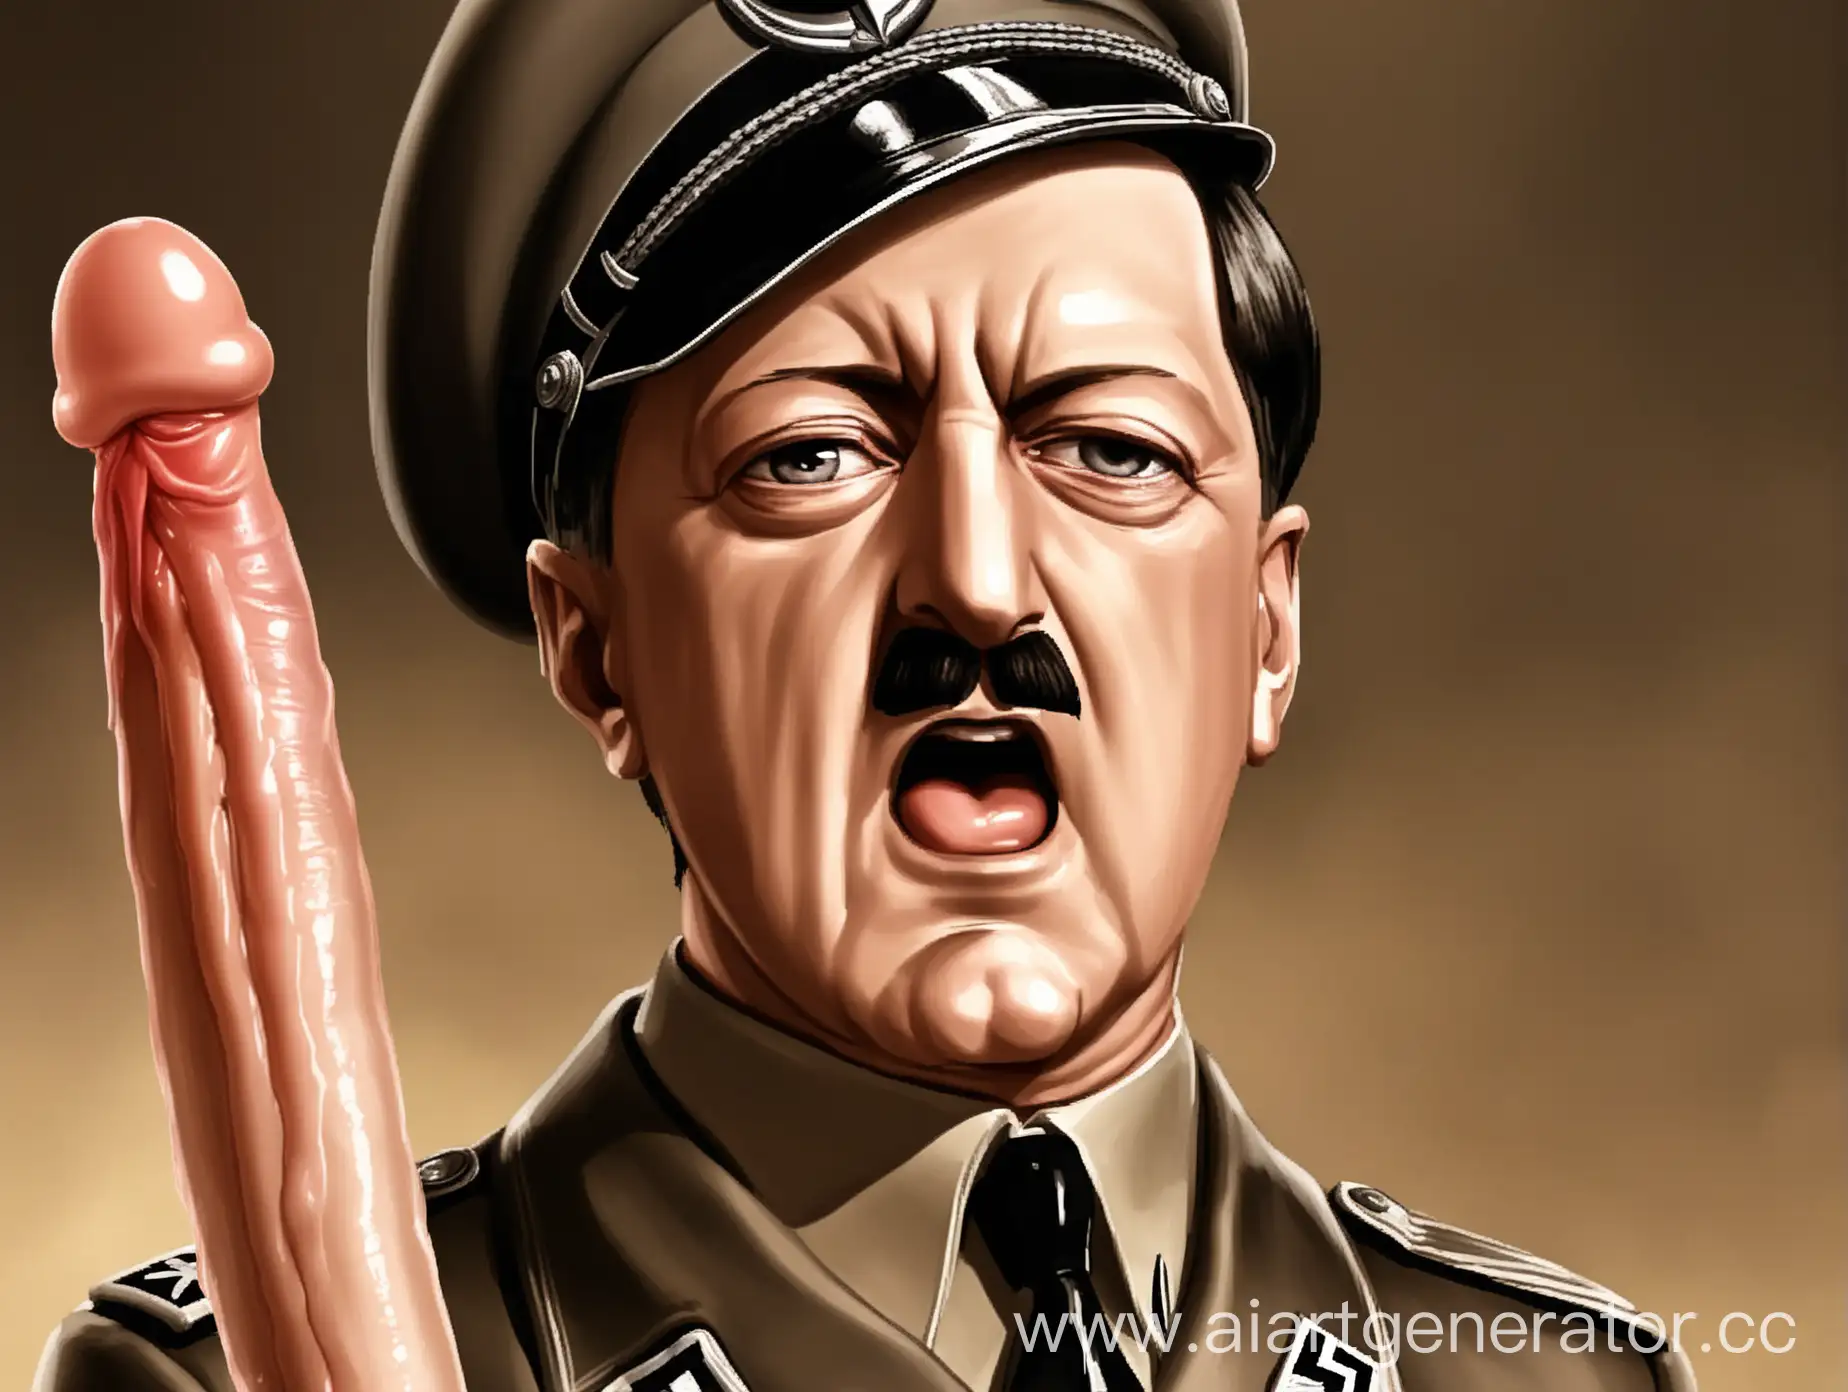 Historical-Figure-with-Controversial-Symbol-Hitler-with-Swastika-Emblem